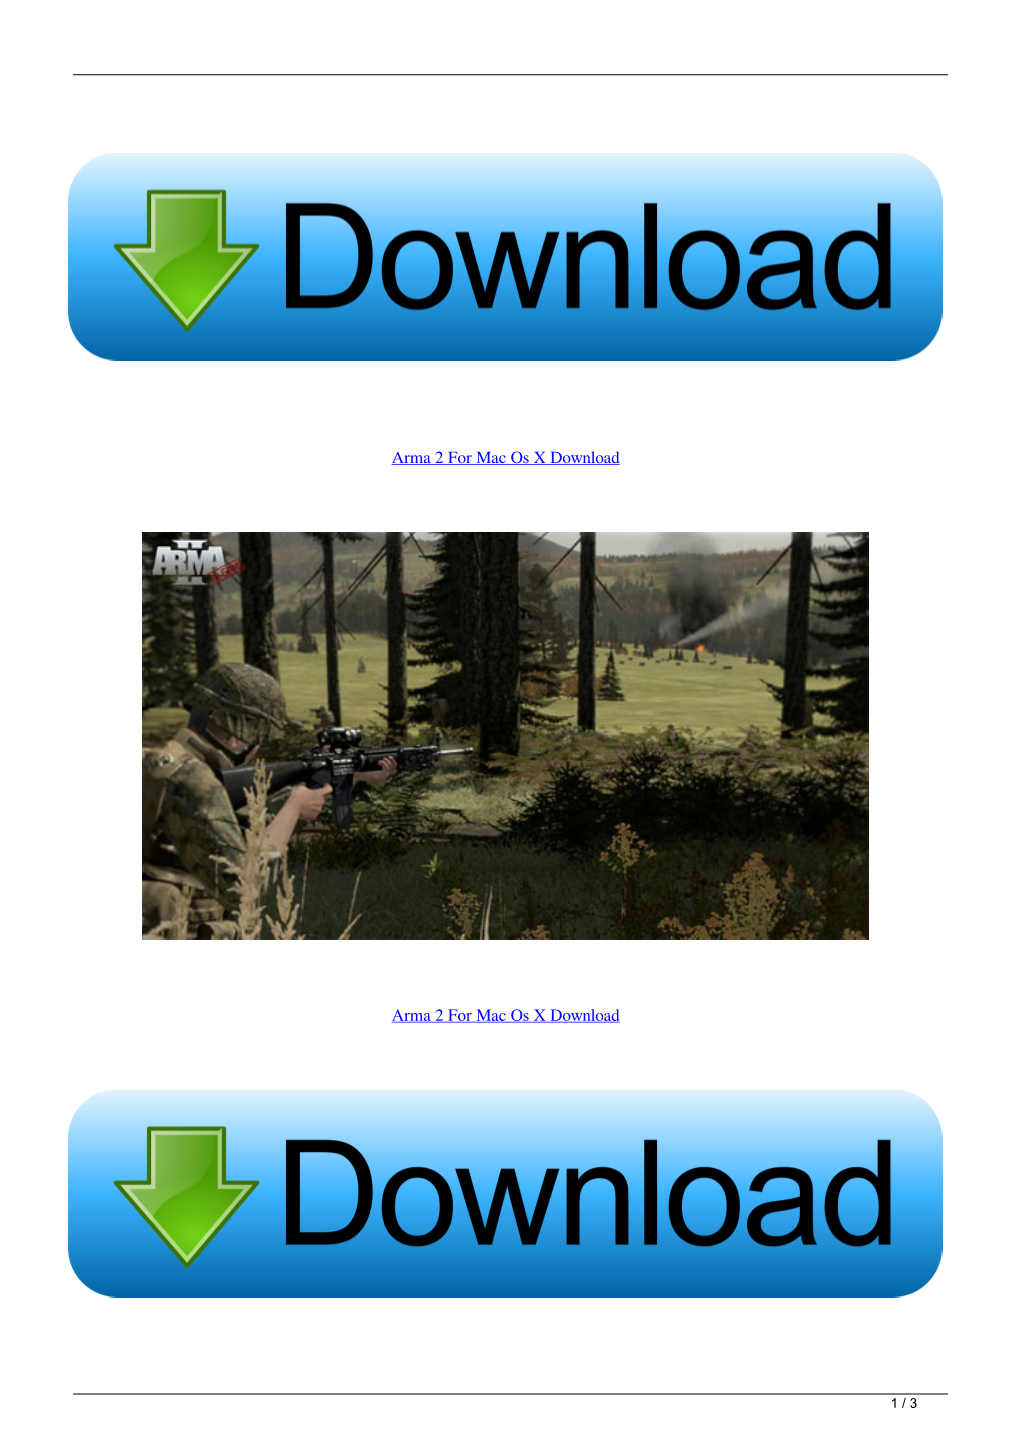 Arma 2 for Mac Os X Download